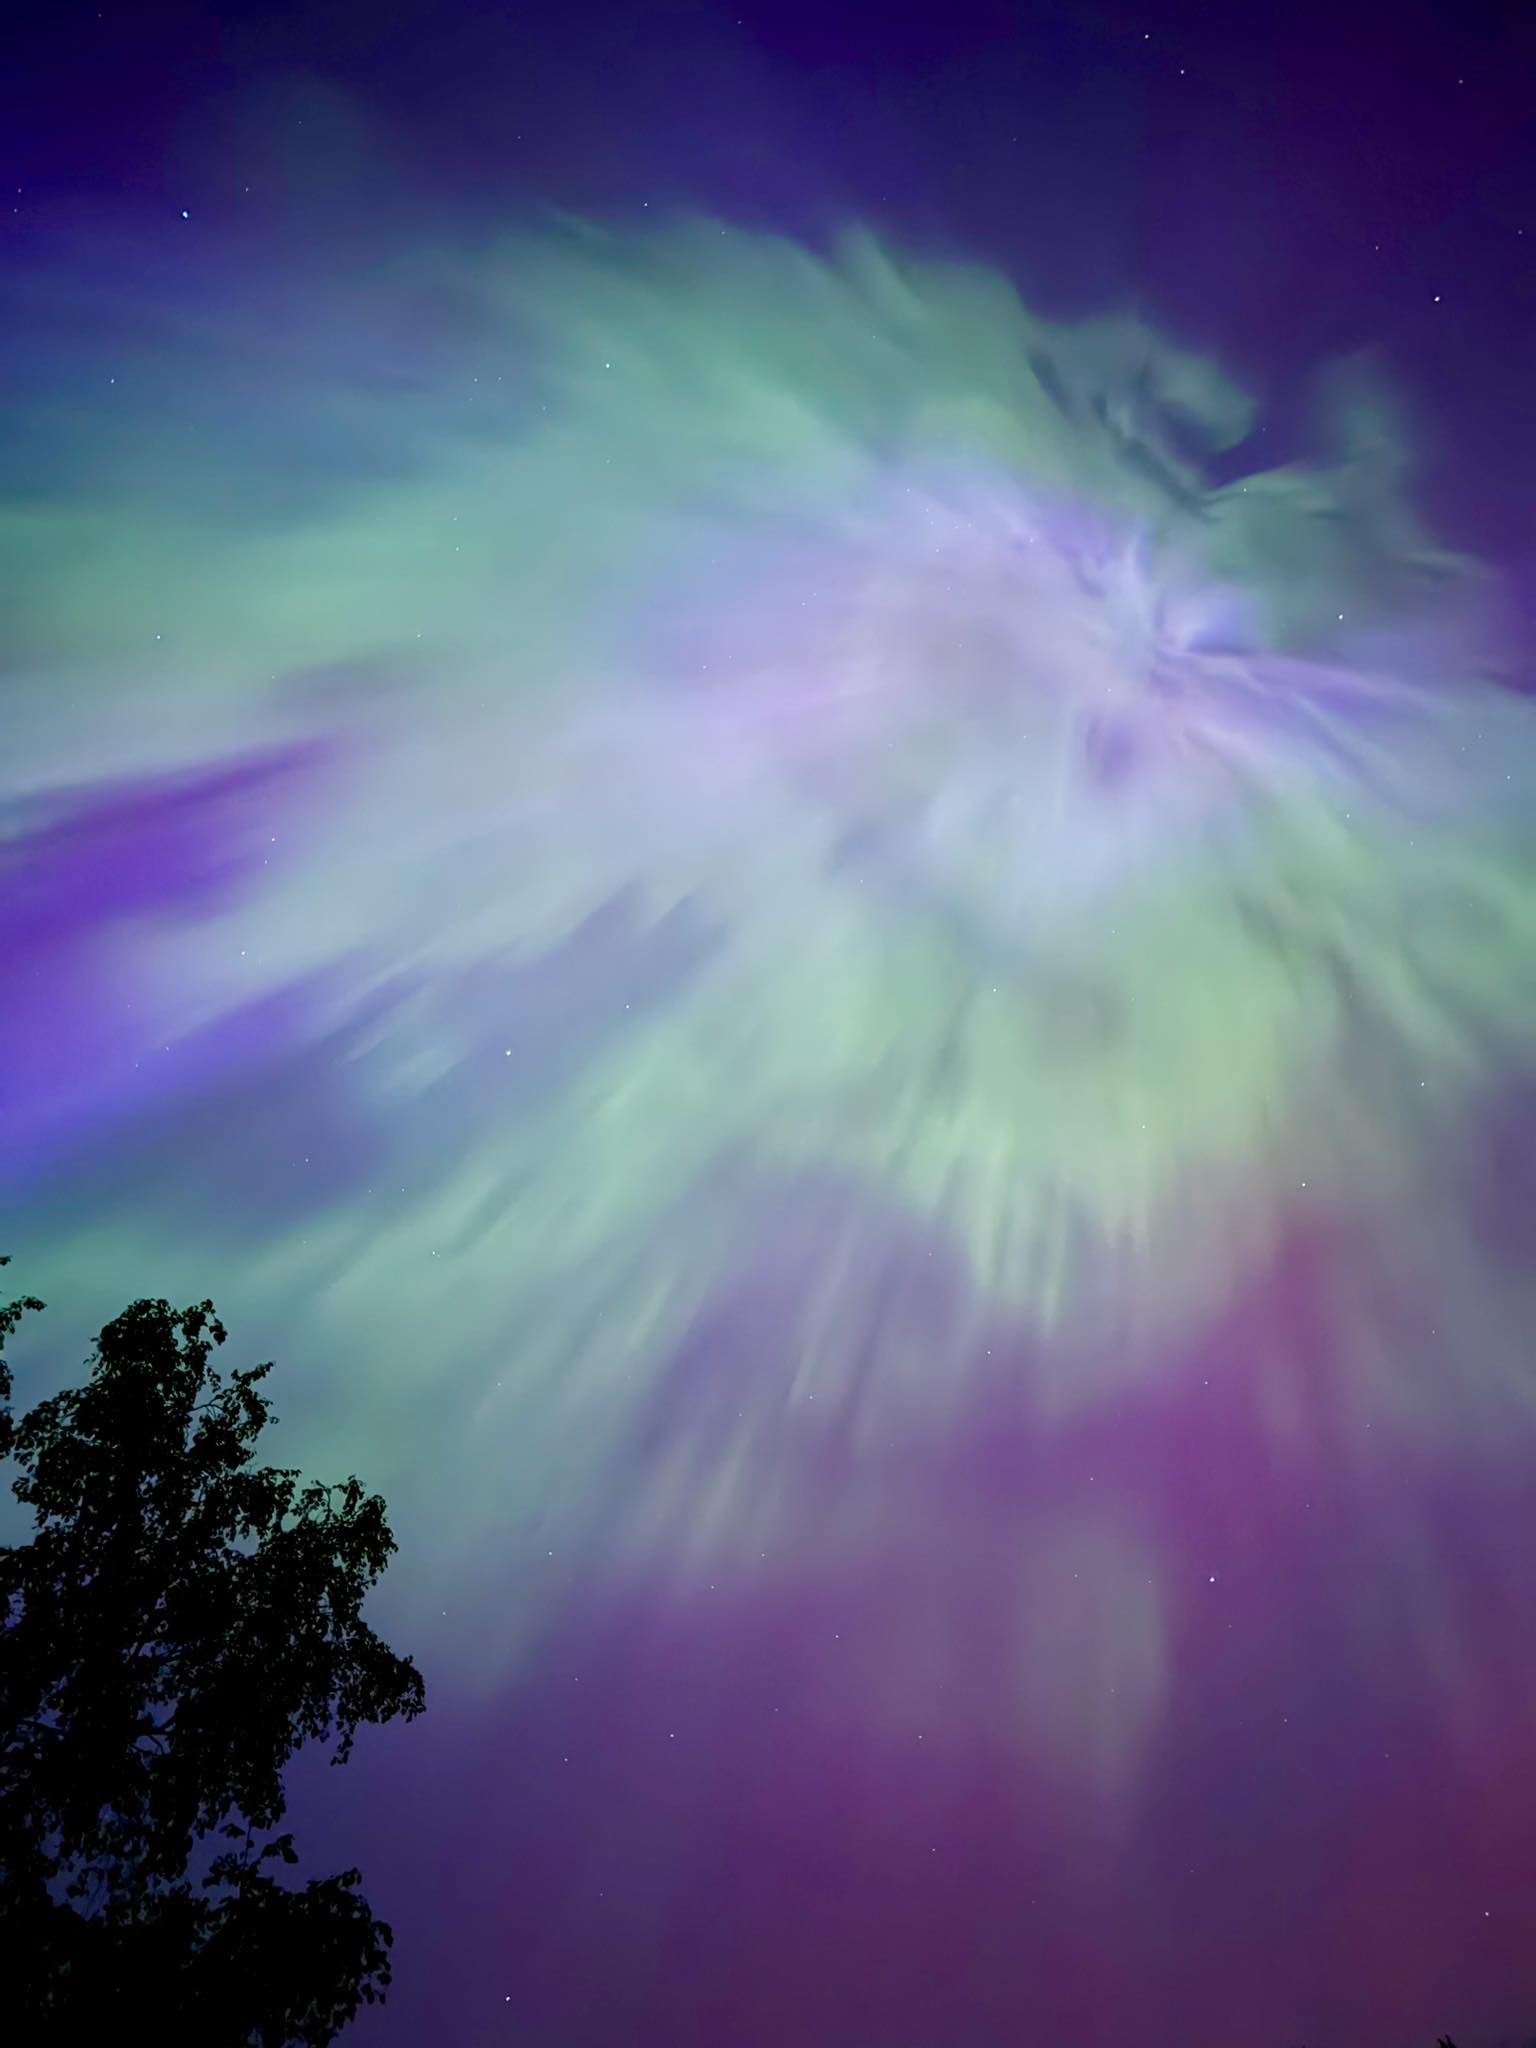 A vibrant aurora borealis with green and purple hues in a starry sky, viewed over the silhouette of a tree, reminiscent of the "aurora hubble" phenomenon.